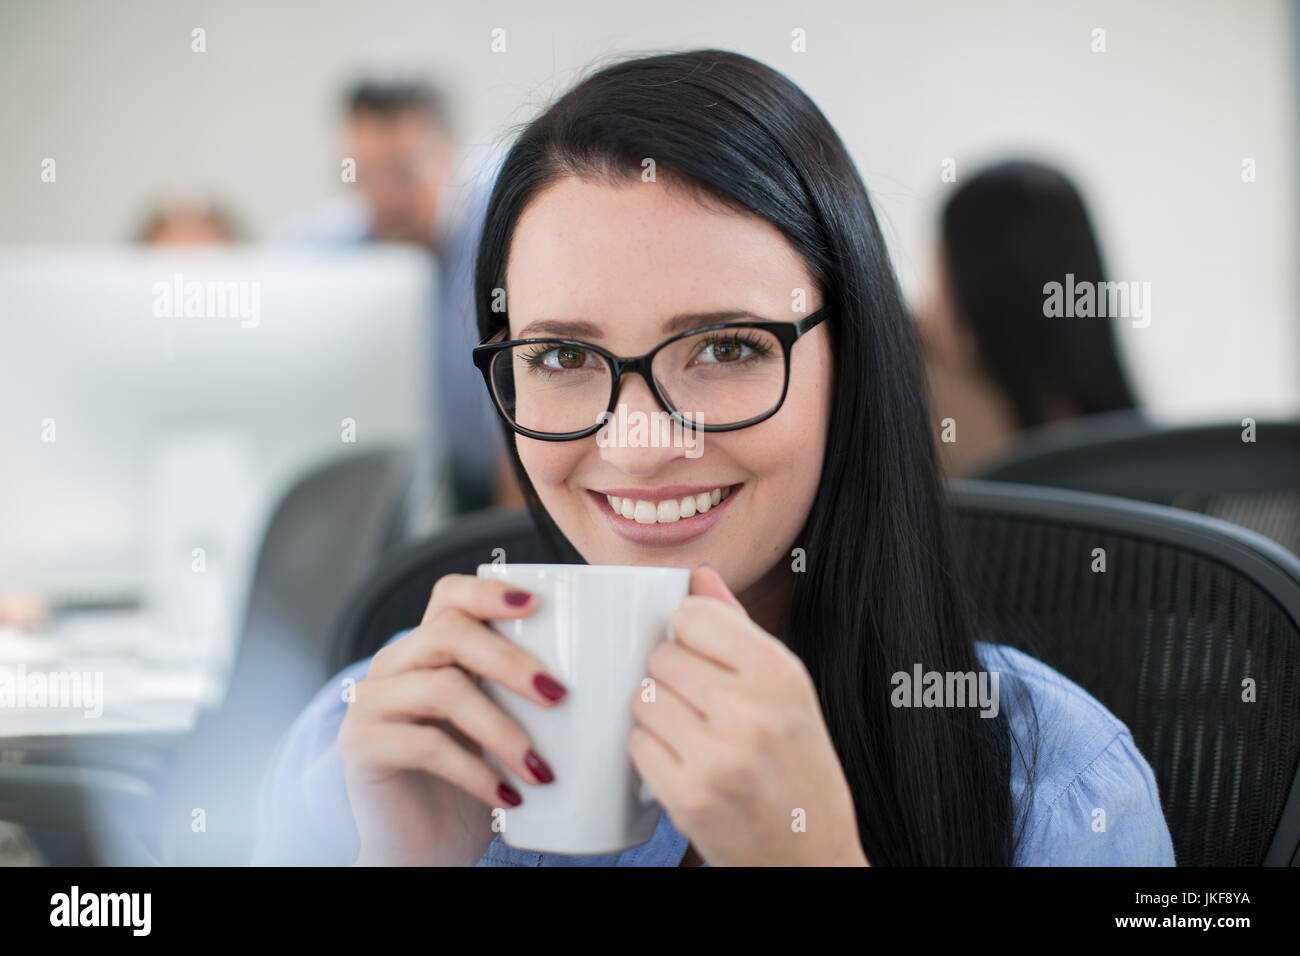 Employee enjoying a cup of coffee at her desk Stock Photo